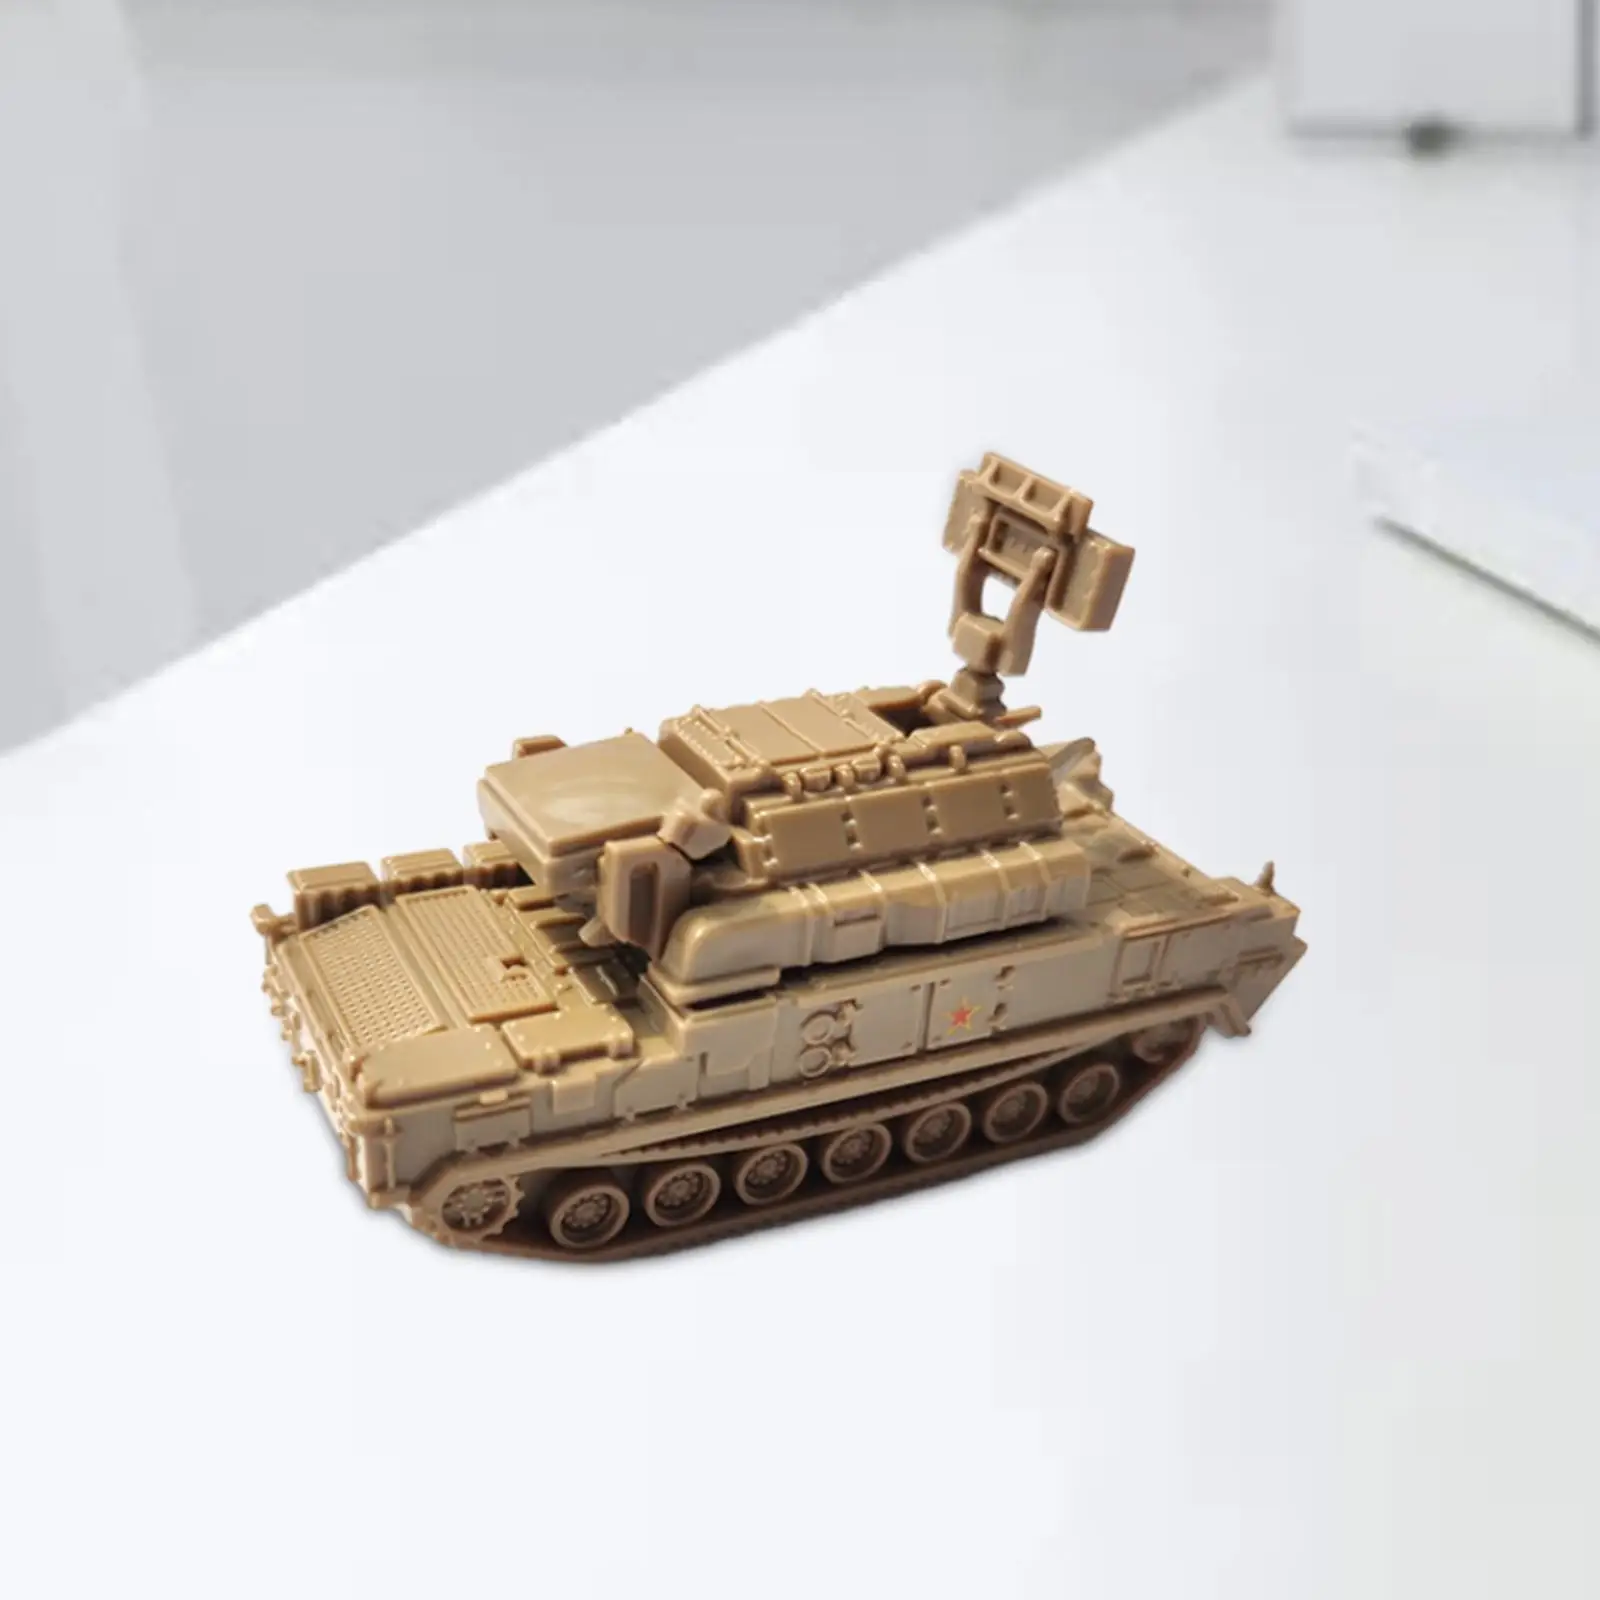 1/144 Scale Miniature Building Model Kits Puzzles DIY Assemble Armored Tank Model for Display Gift Collectibles Boys Children